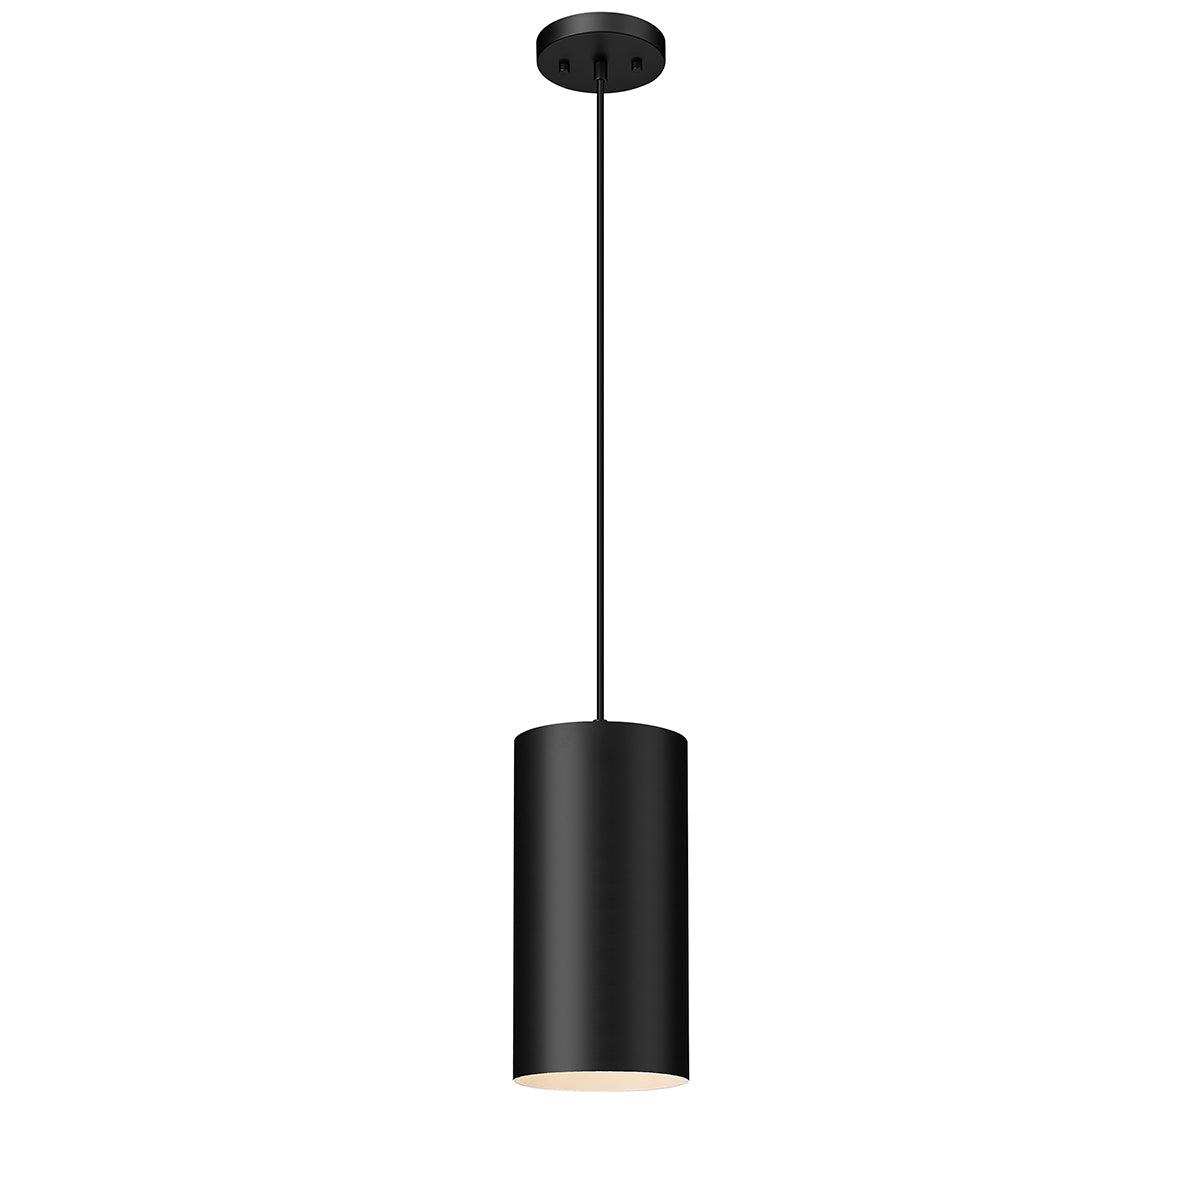 Millennium Lighting 1 Light Outdoor Hanging Pendant, Searcy Collection, Powdered Coat Black or Powdered Coat Bronze Finish